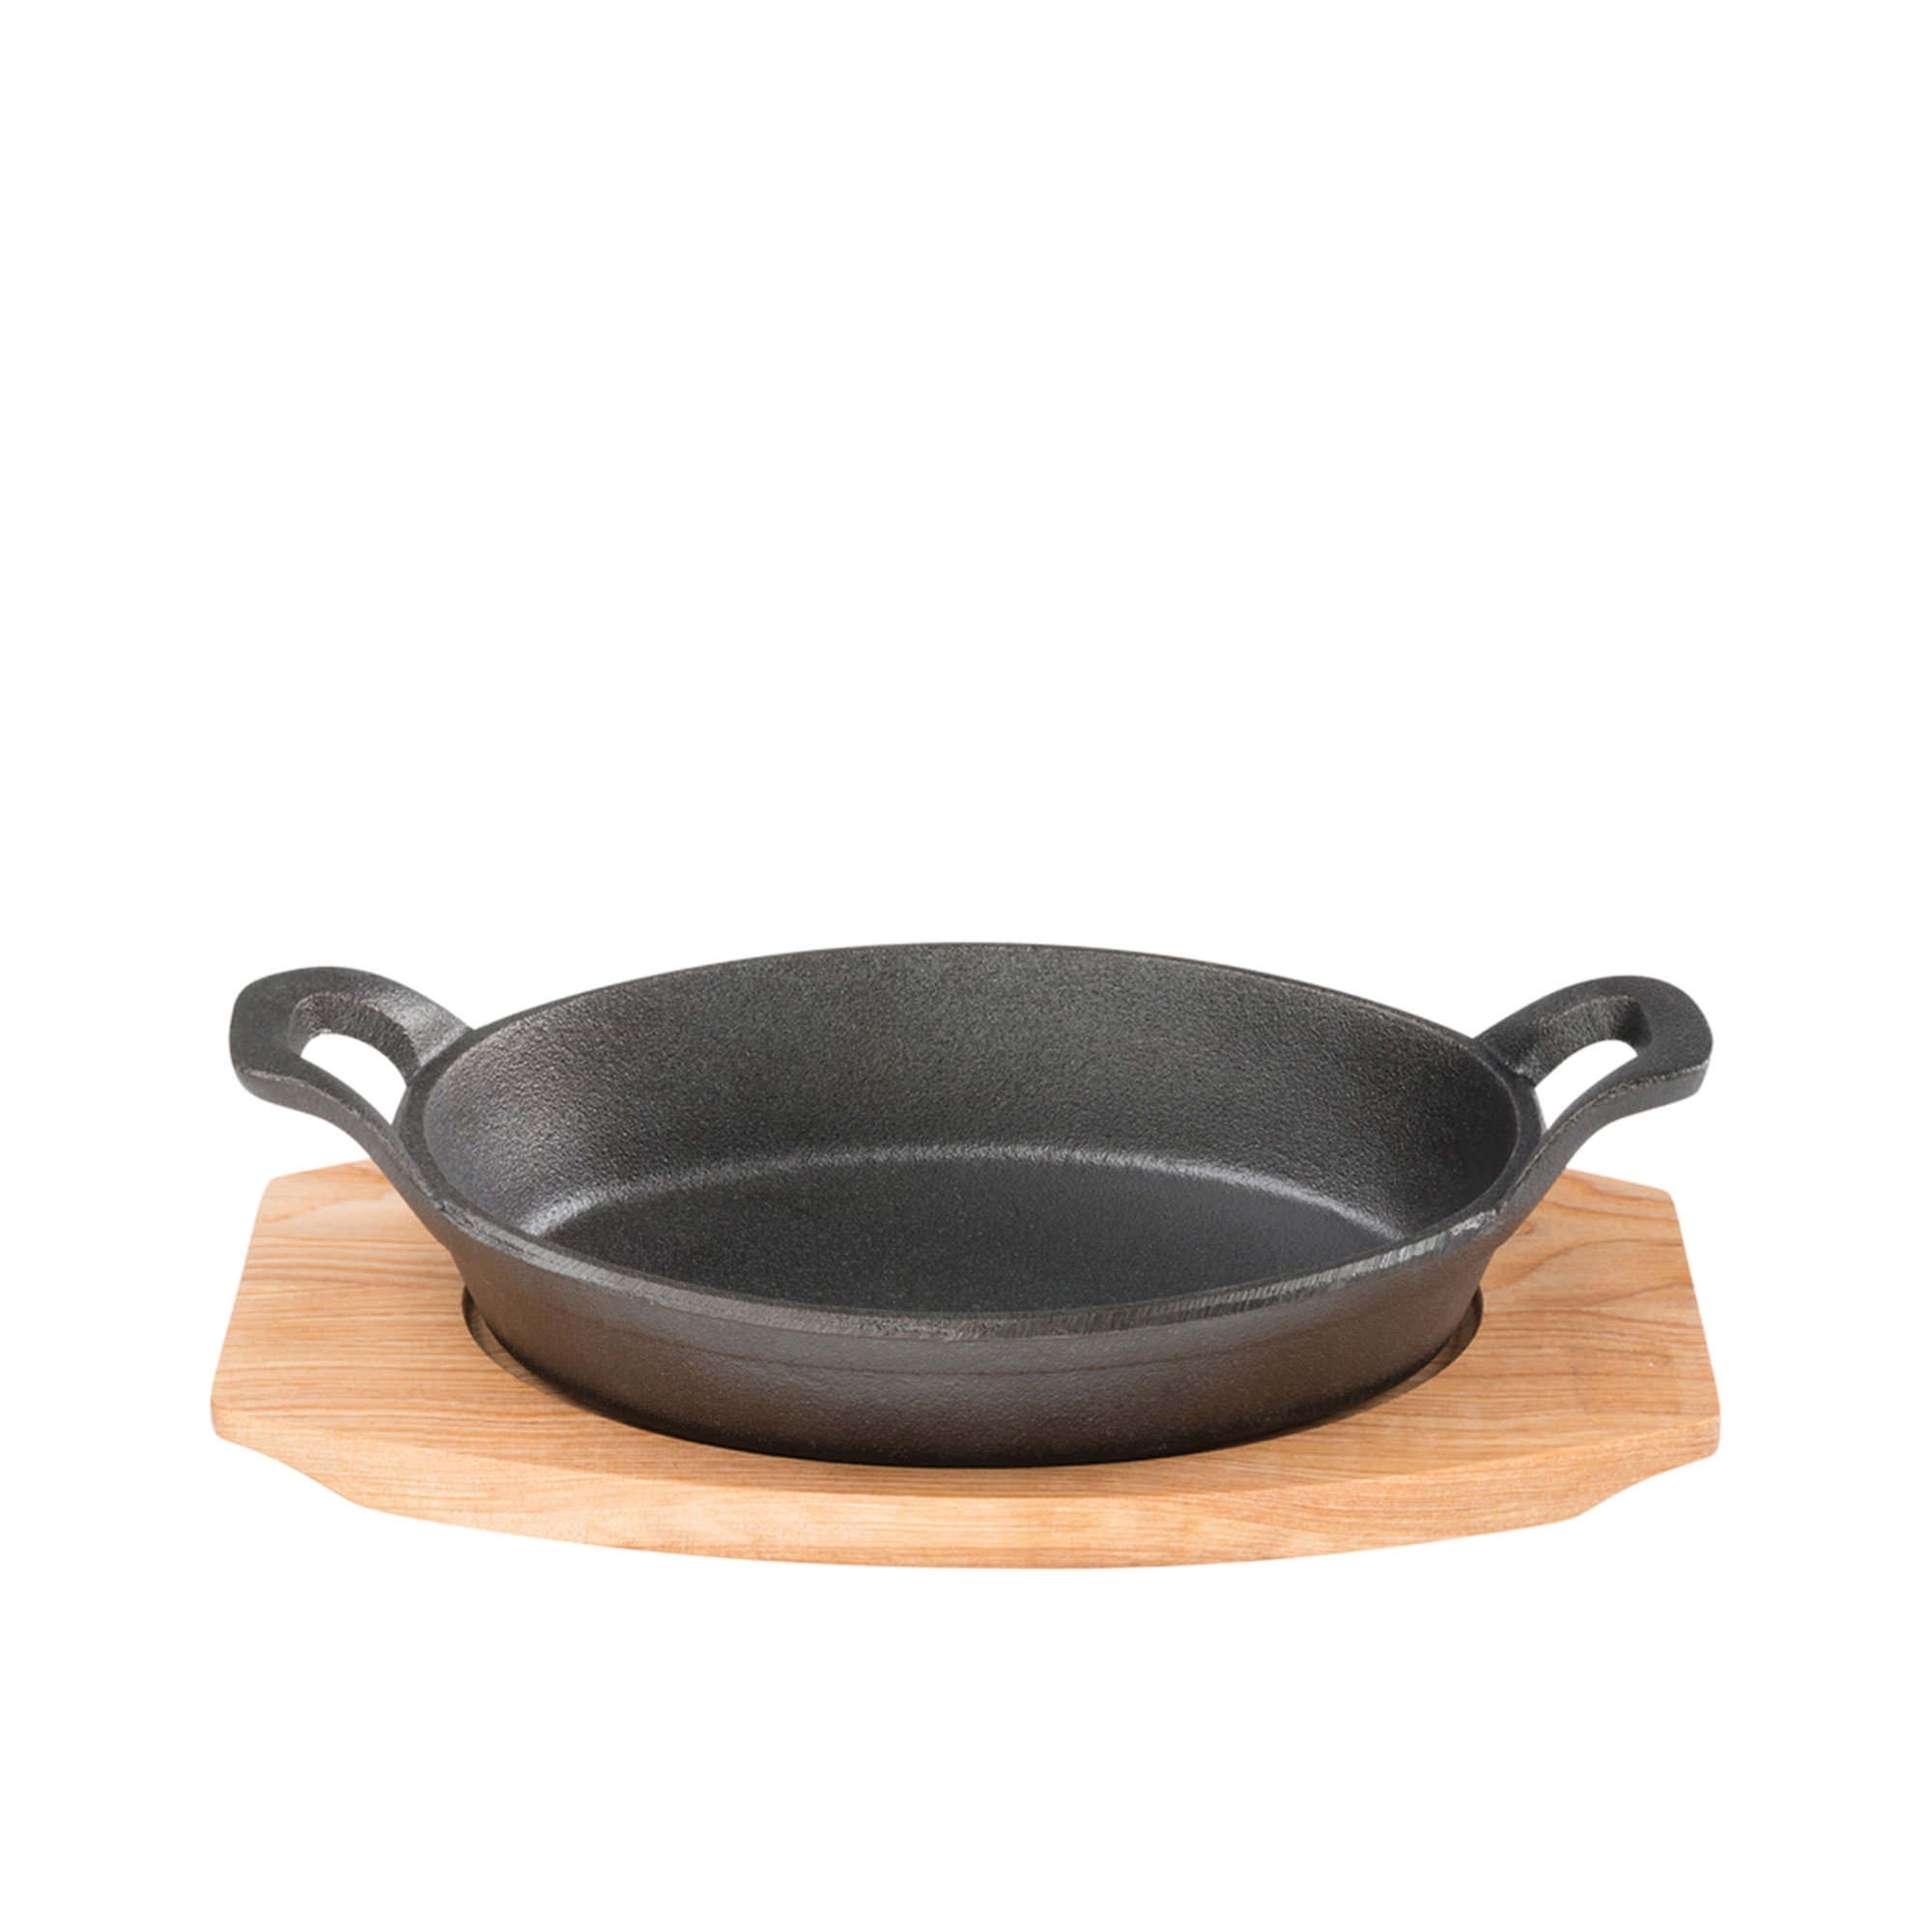 Pyrolux Pyrocast Cast Iron Oval Gratin with Maple Tray 15.5x10cm Image 1